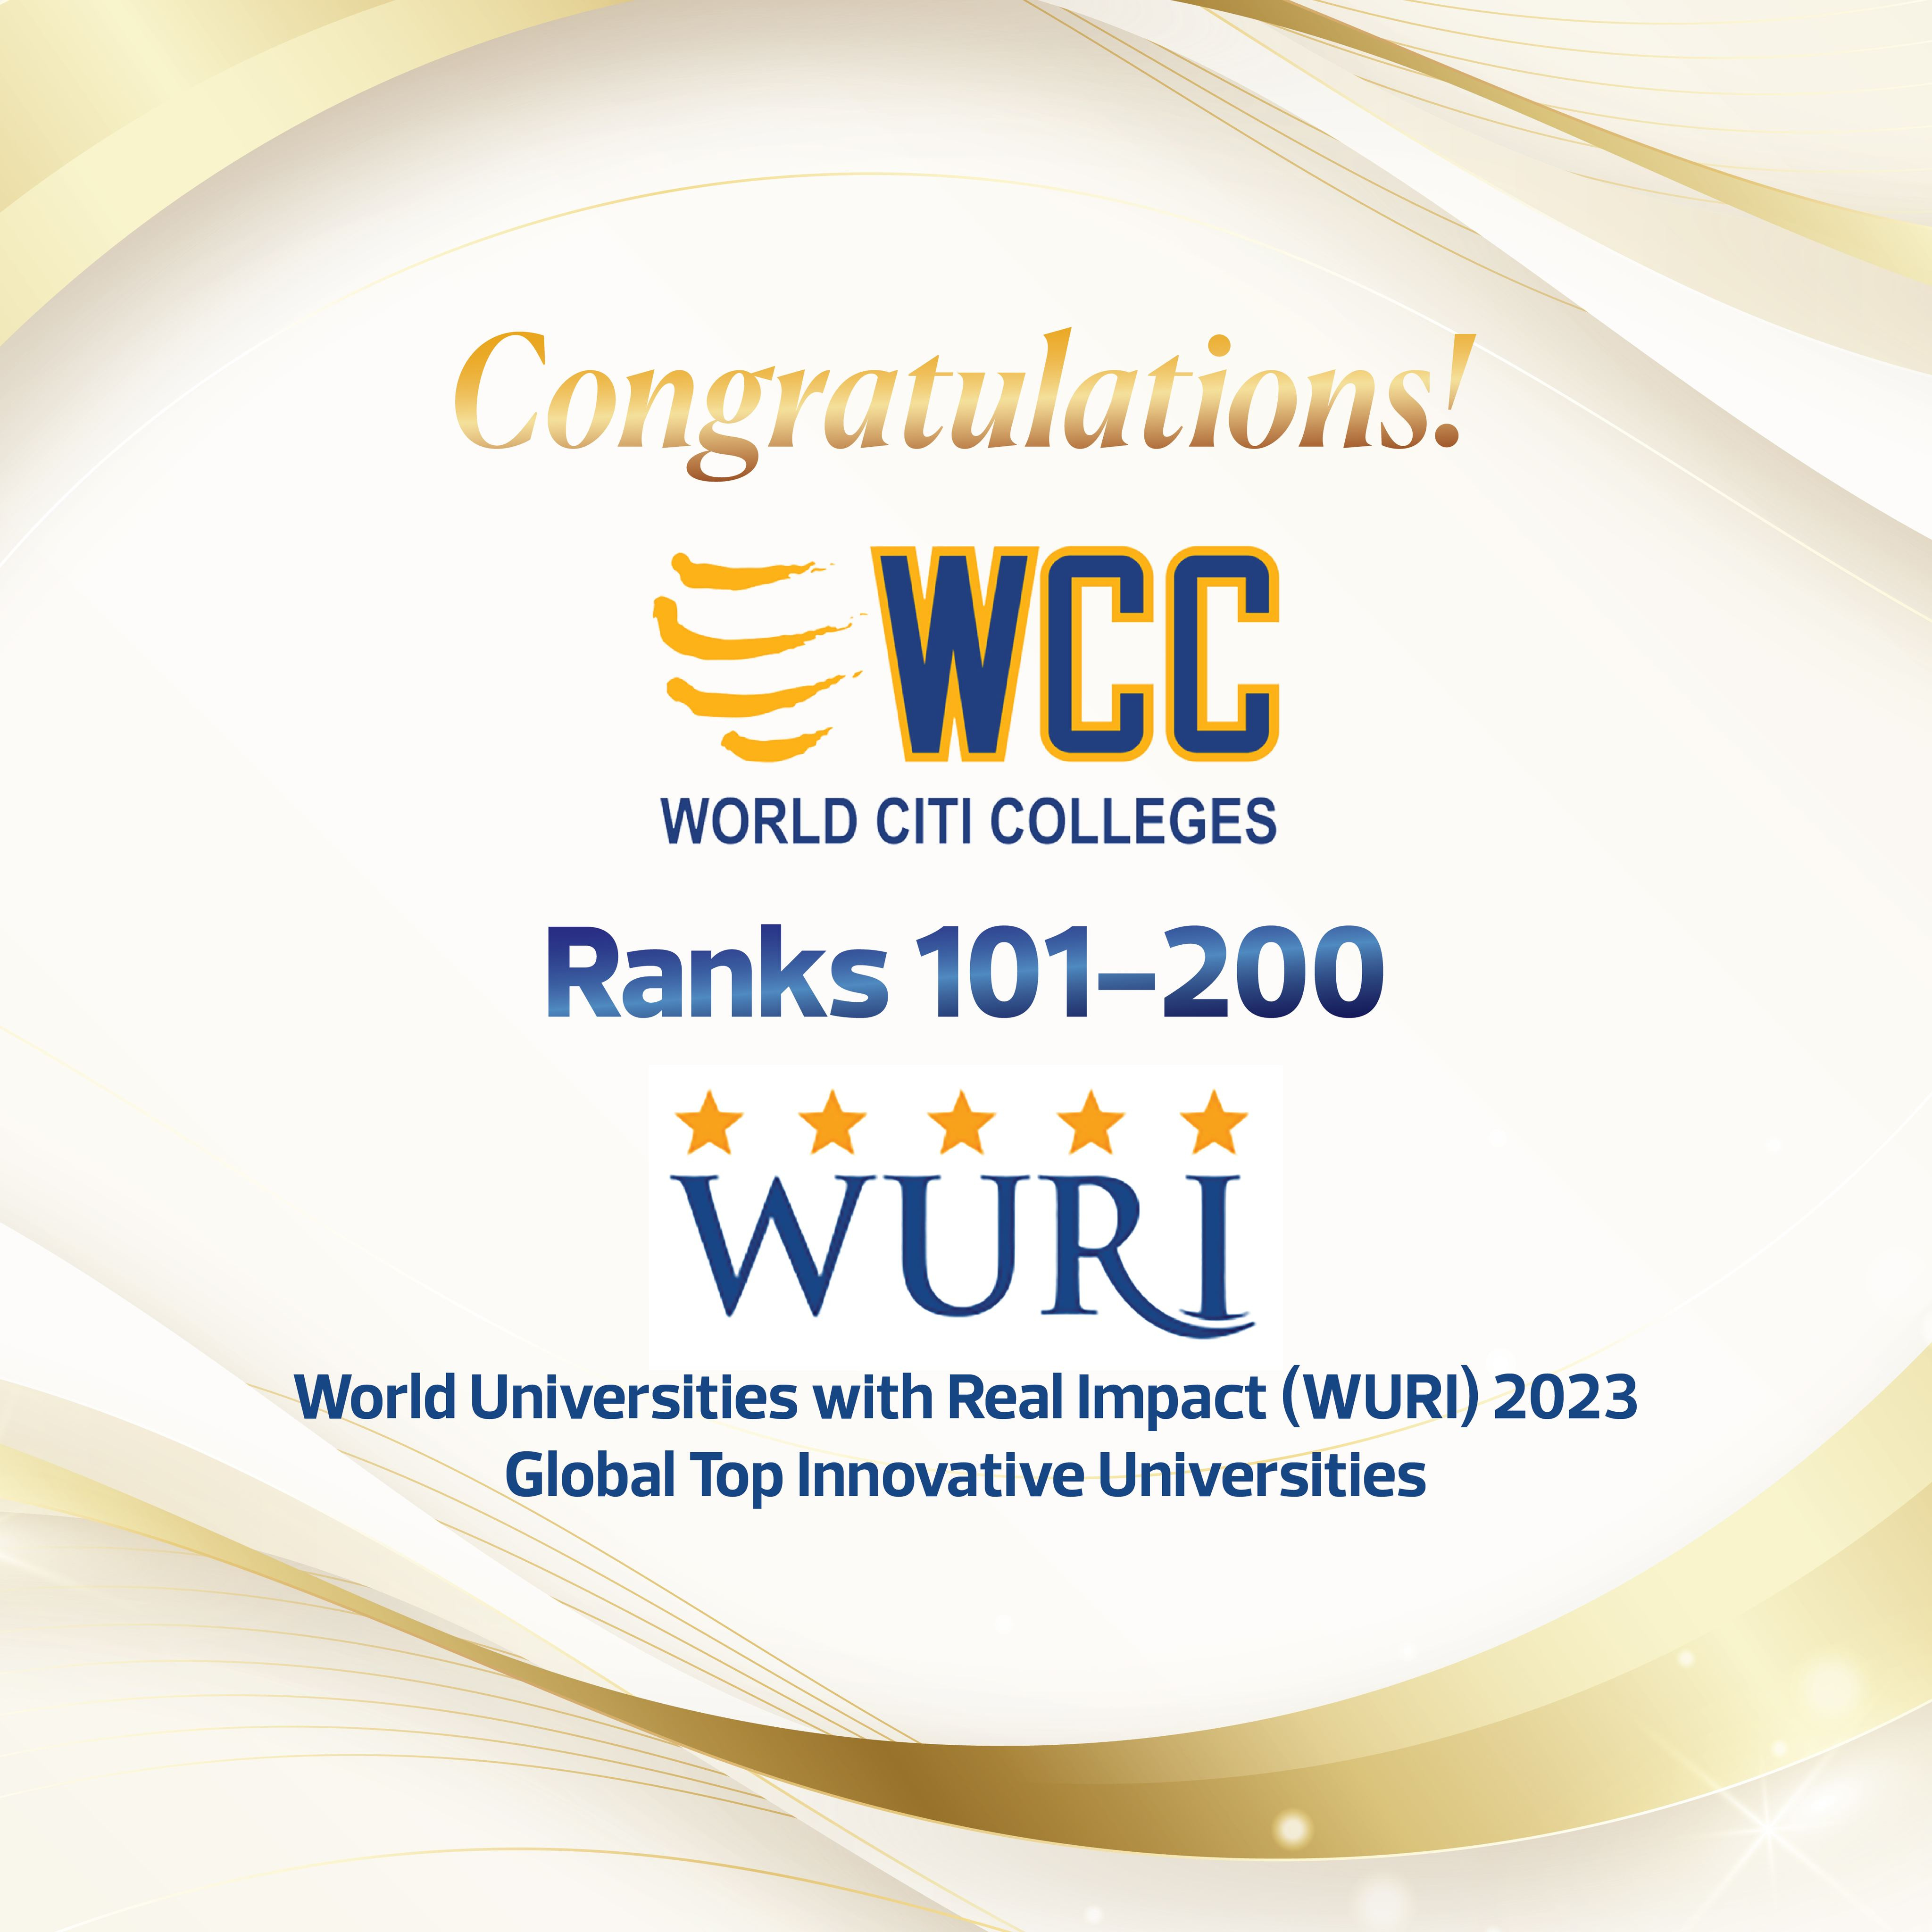 World Citi Colleges Makes Historic Debut at 2023 WURI Global Top Innovative Universities